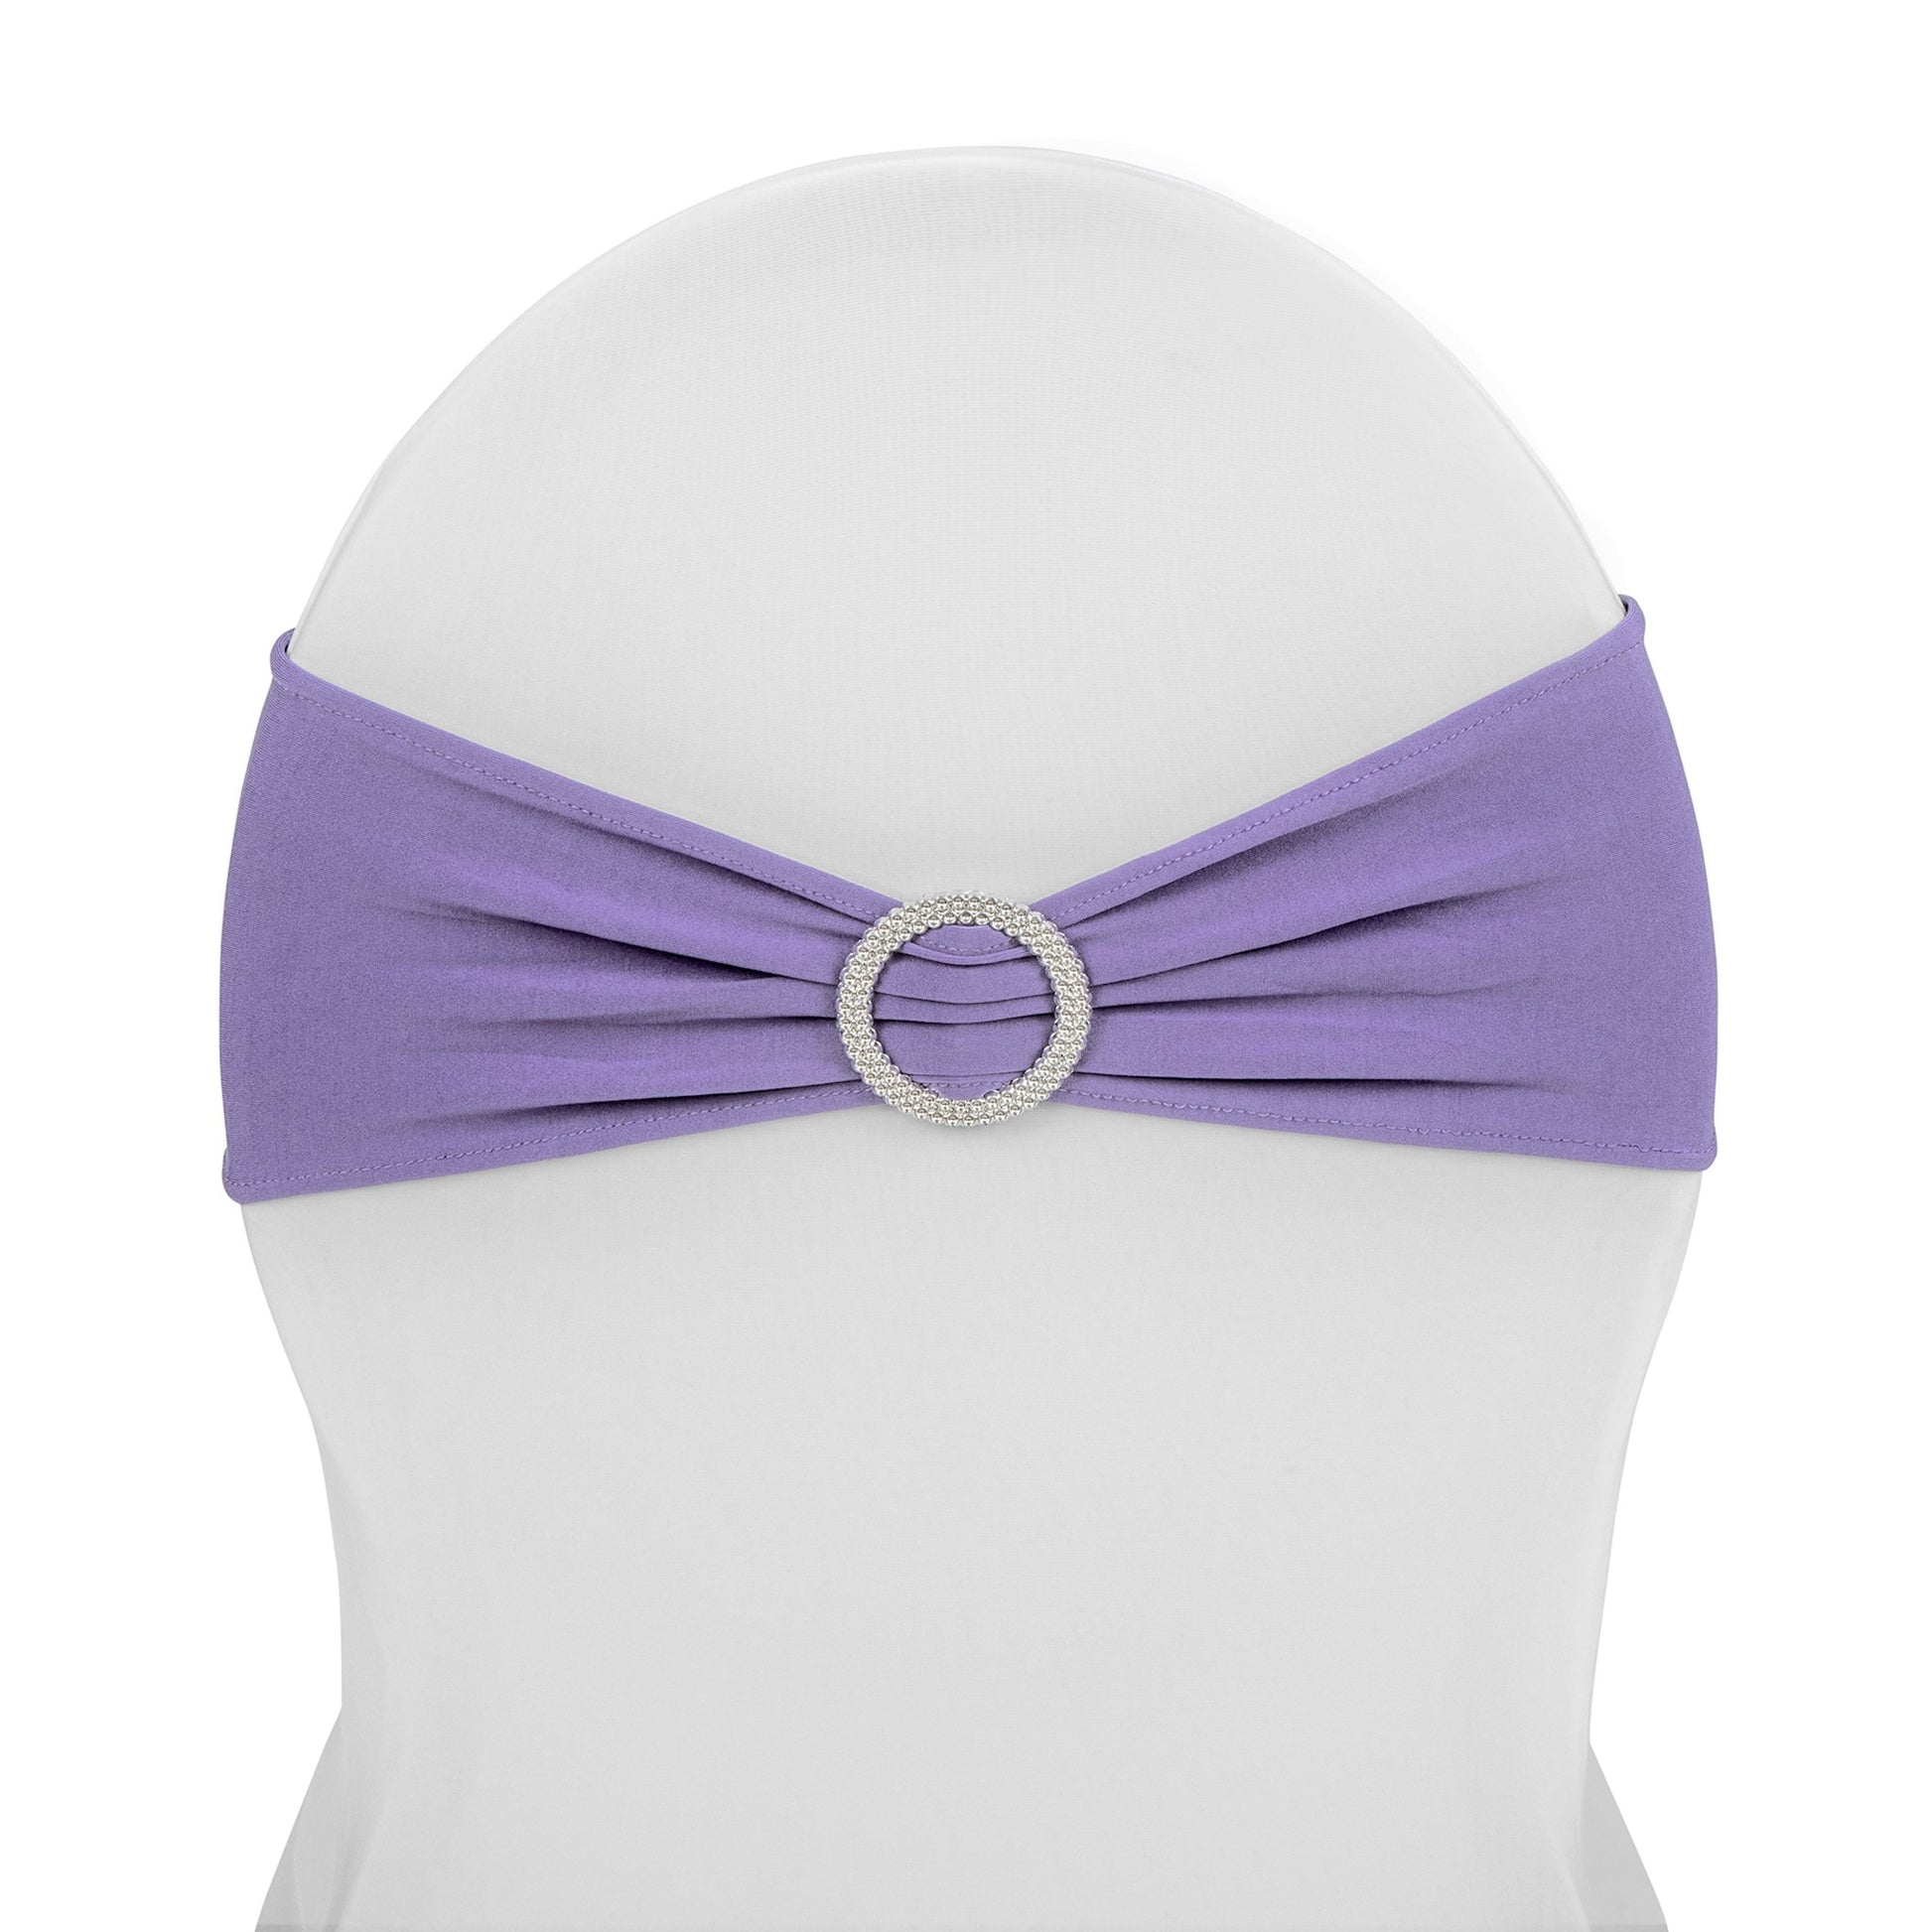 Buckle Spandex Stretch Chair Band - Victorian Lilac/Wisteria